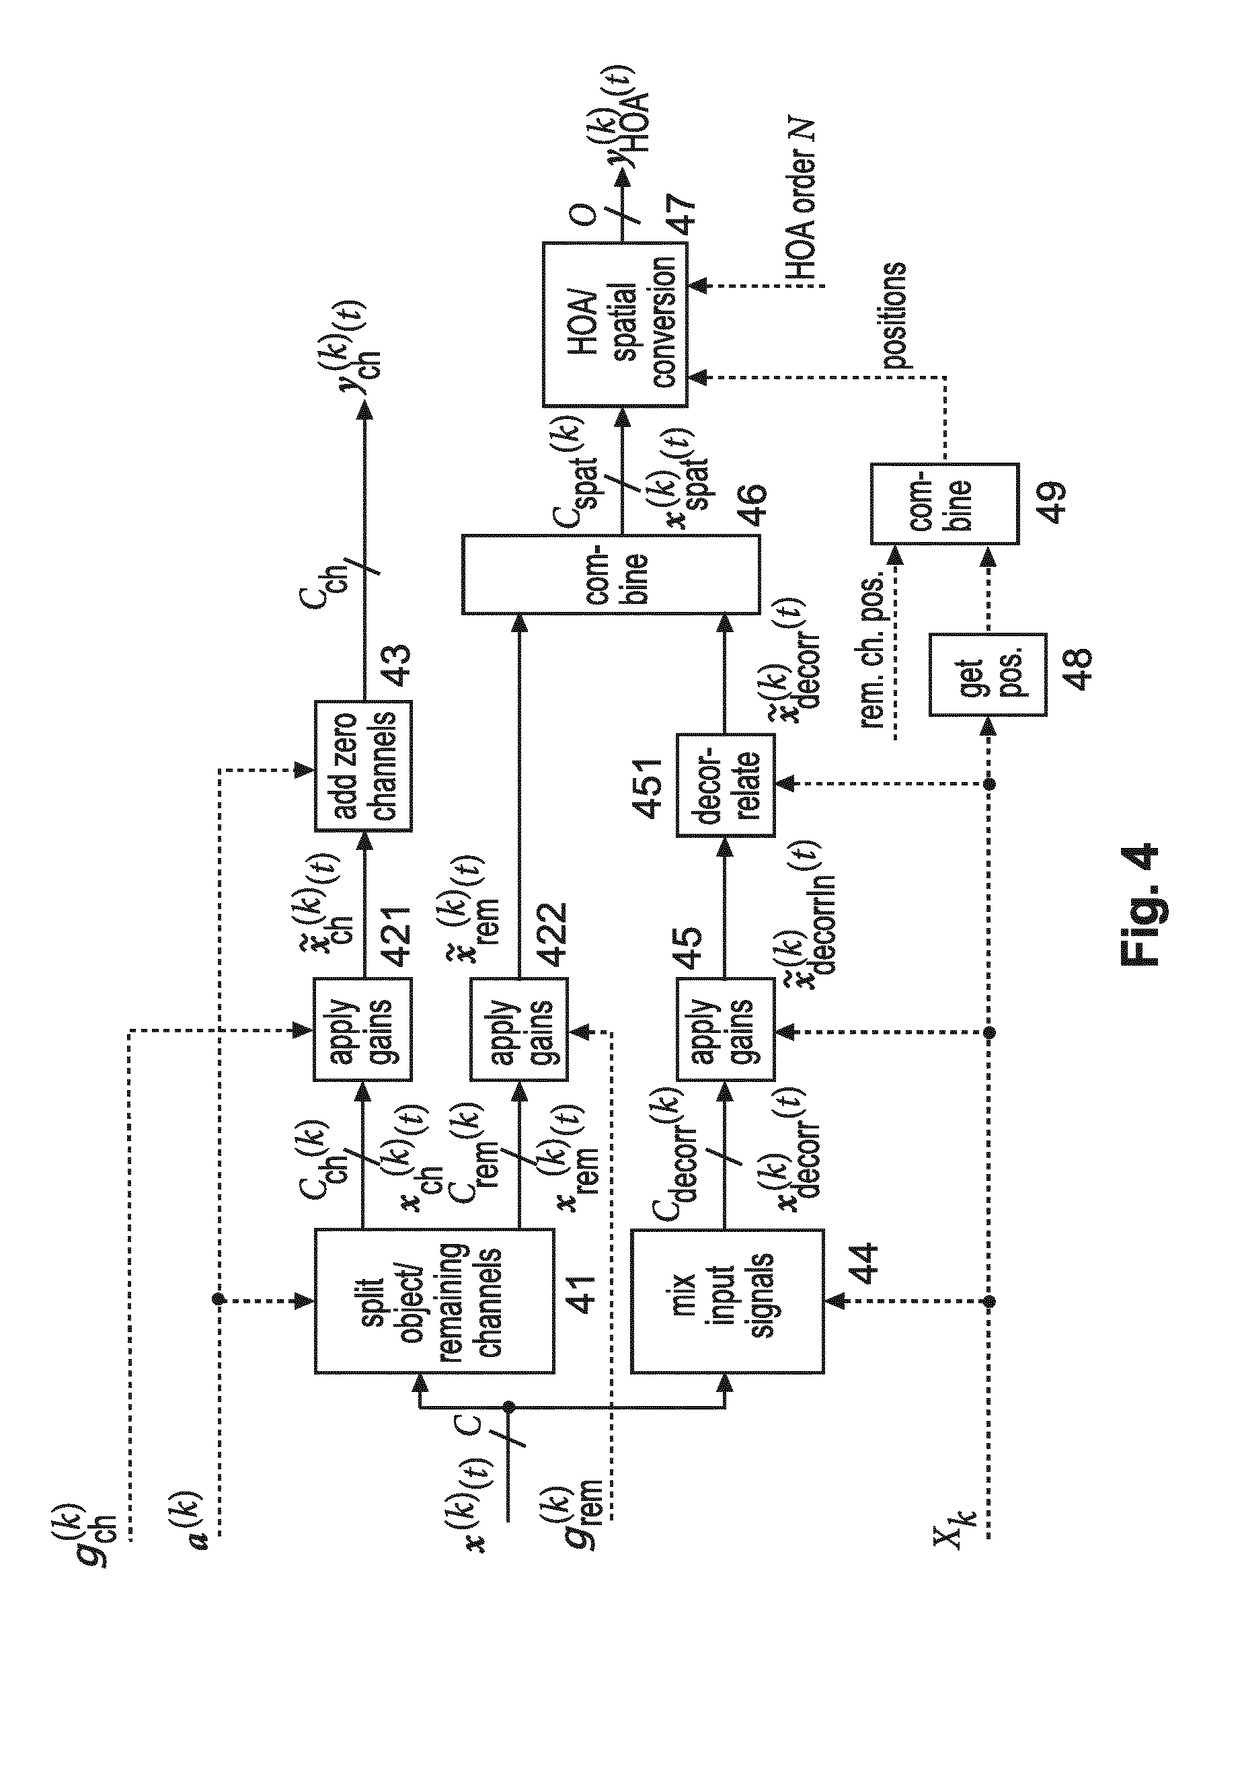 Method and apparatus for generating from a multi-channel 2d audio input signal a 3D sound representation signal